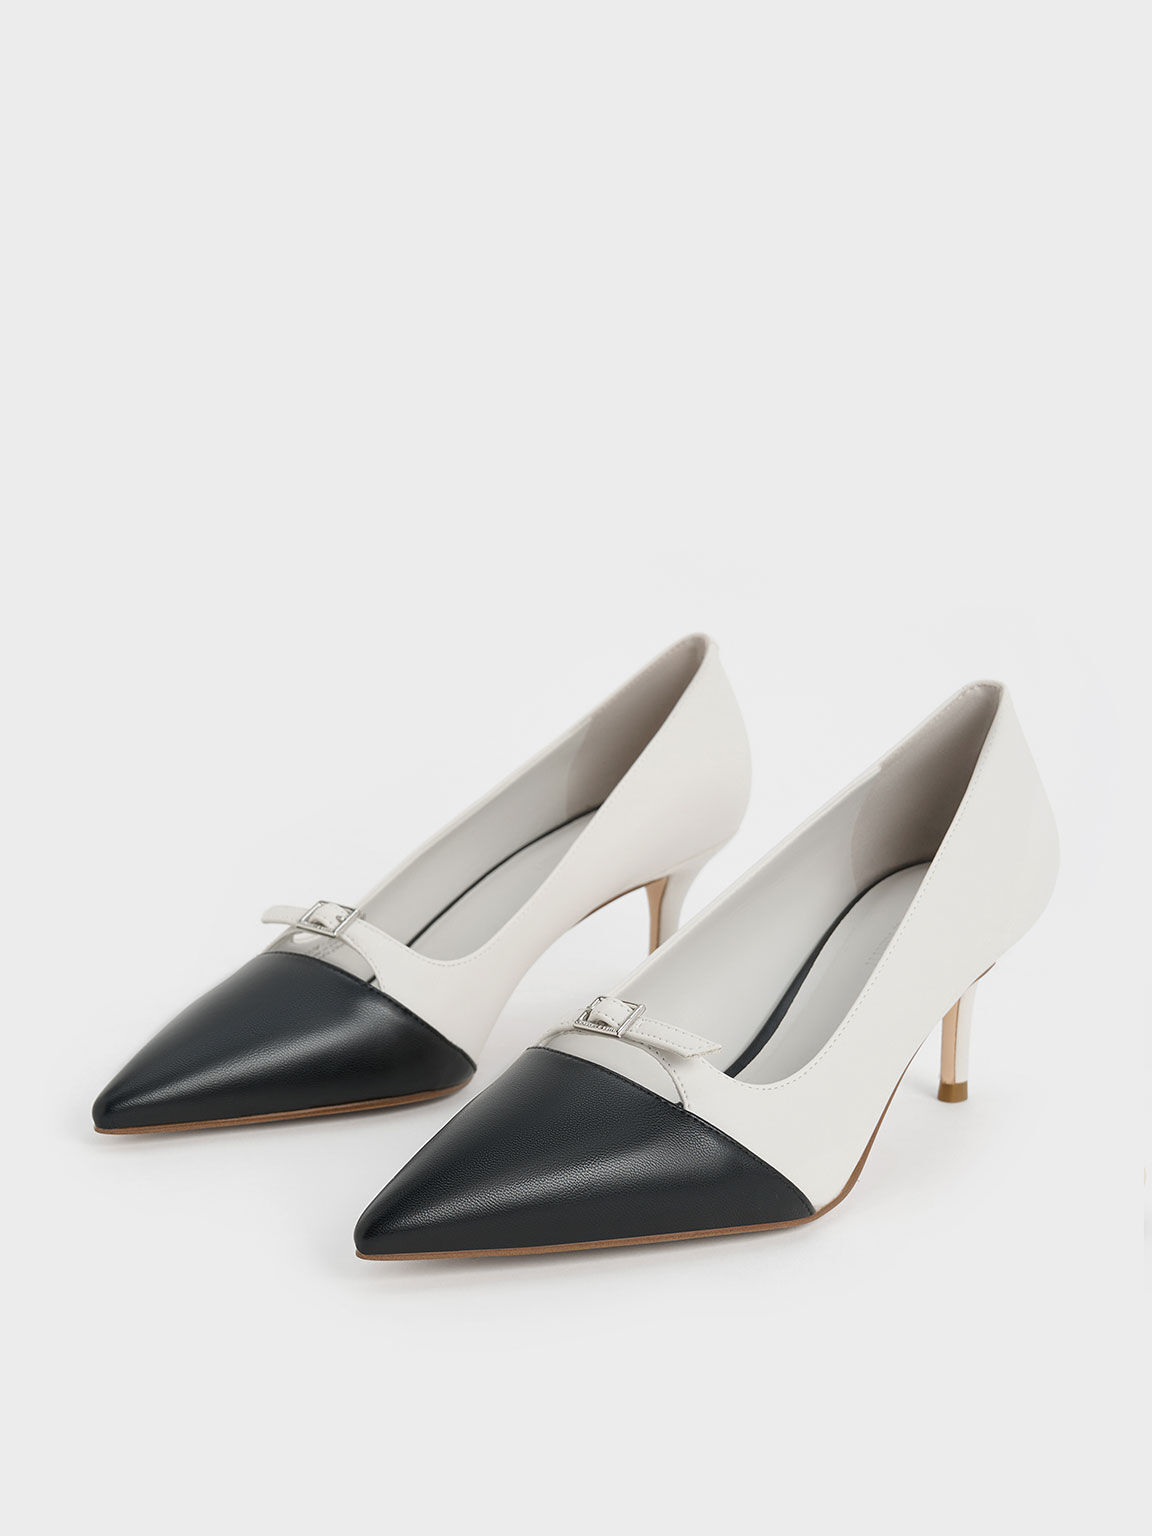 Two Tone Stitched Bow Ballet Beige And Black Heels Pumps For Women Perfect  For Work, Parties And Fashionable Wear Style 220614 From Luo06, $37.15 |  DHgate.Com